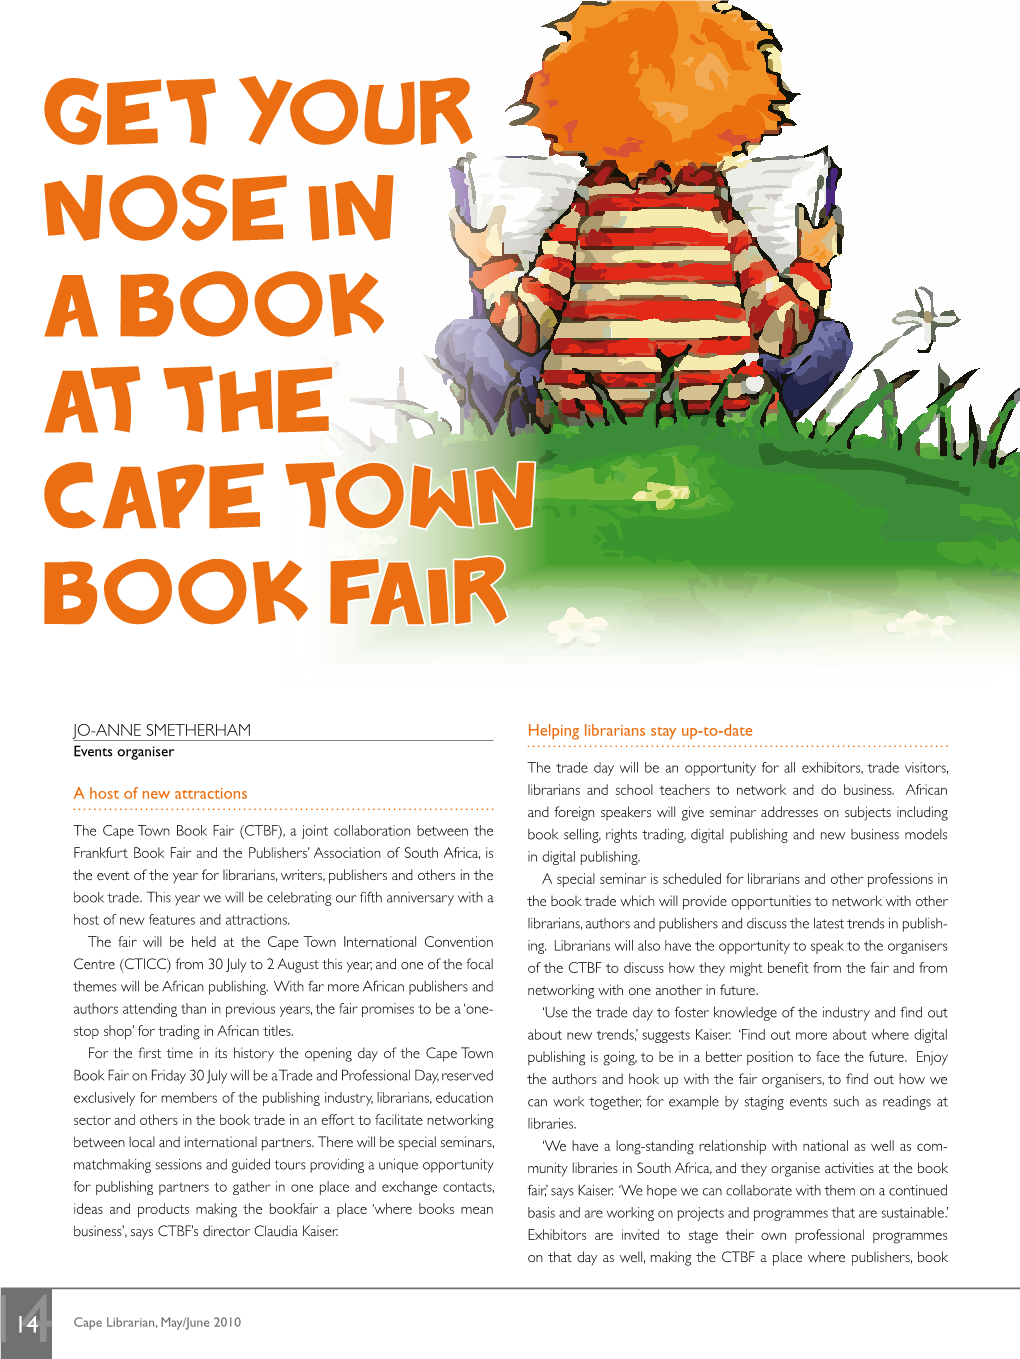 Get Your Nose in a Book at the Cape Town Book Fair